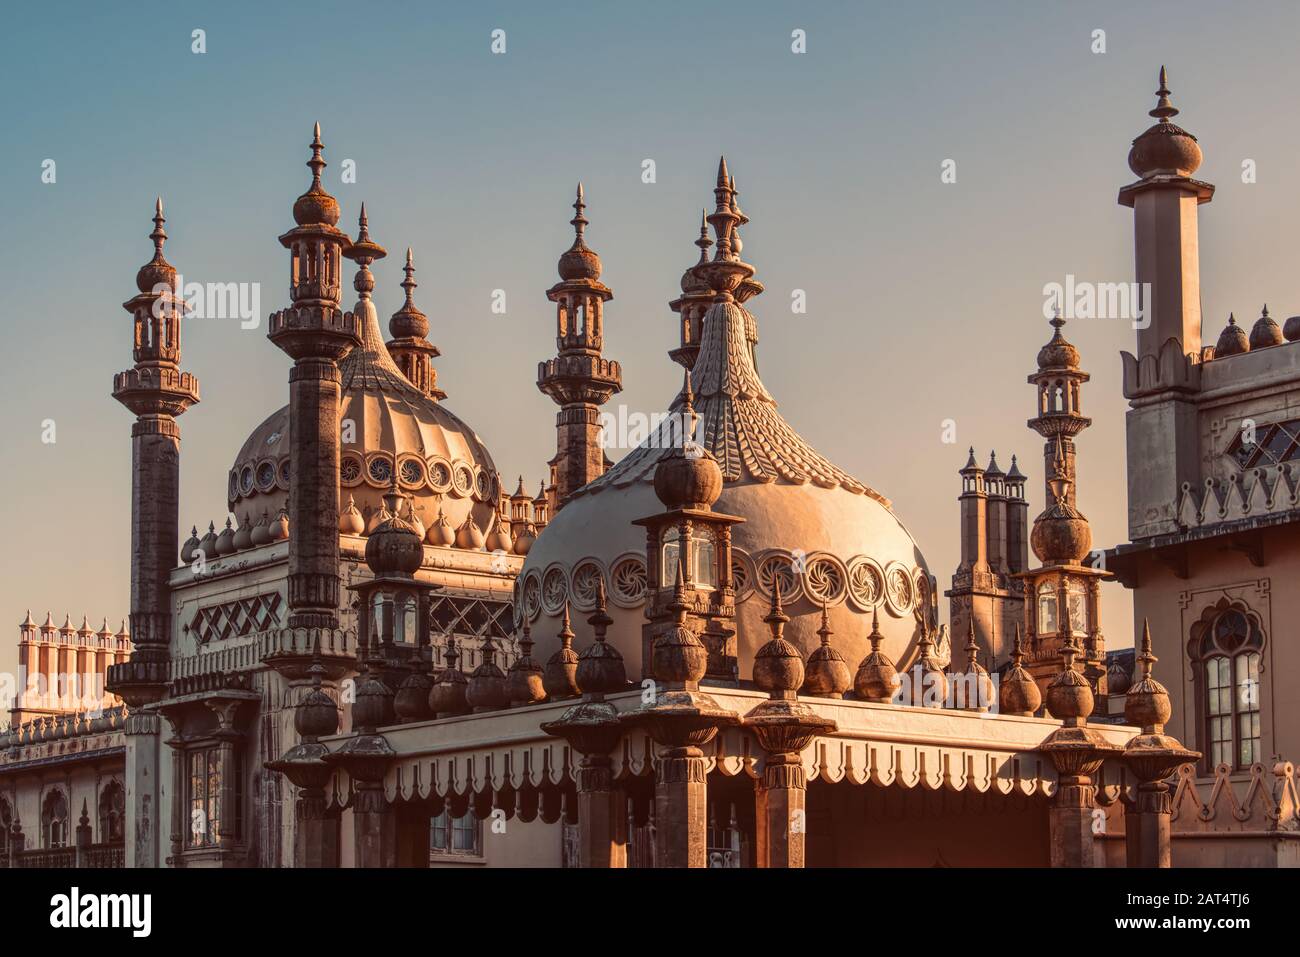 Brighton Pavilion, the Royal Pavilion in Brighton, United Kingdom. Onion domes and minarets on the roof. Indian style architecture and major landmark. Stock Photo